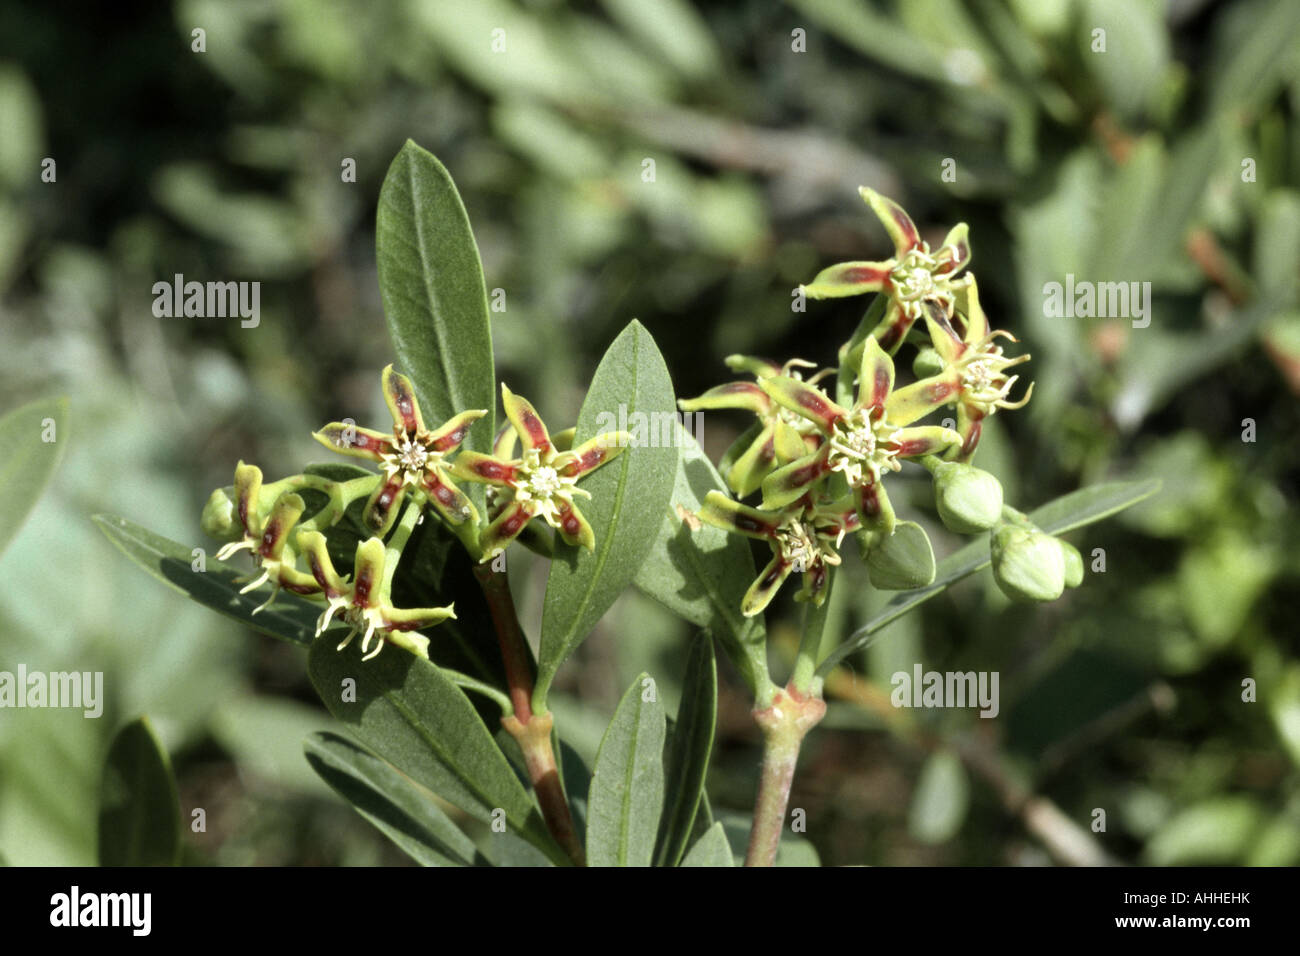 cornical (Periploca laevigata), twig with blossoms and flower buds, Canary, Tenerife Stock Photo